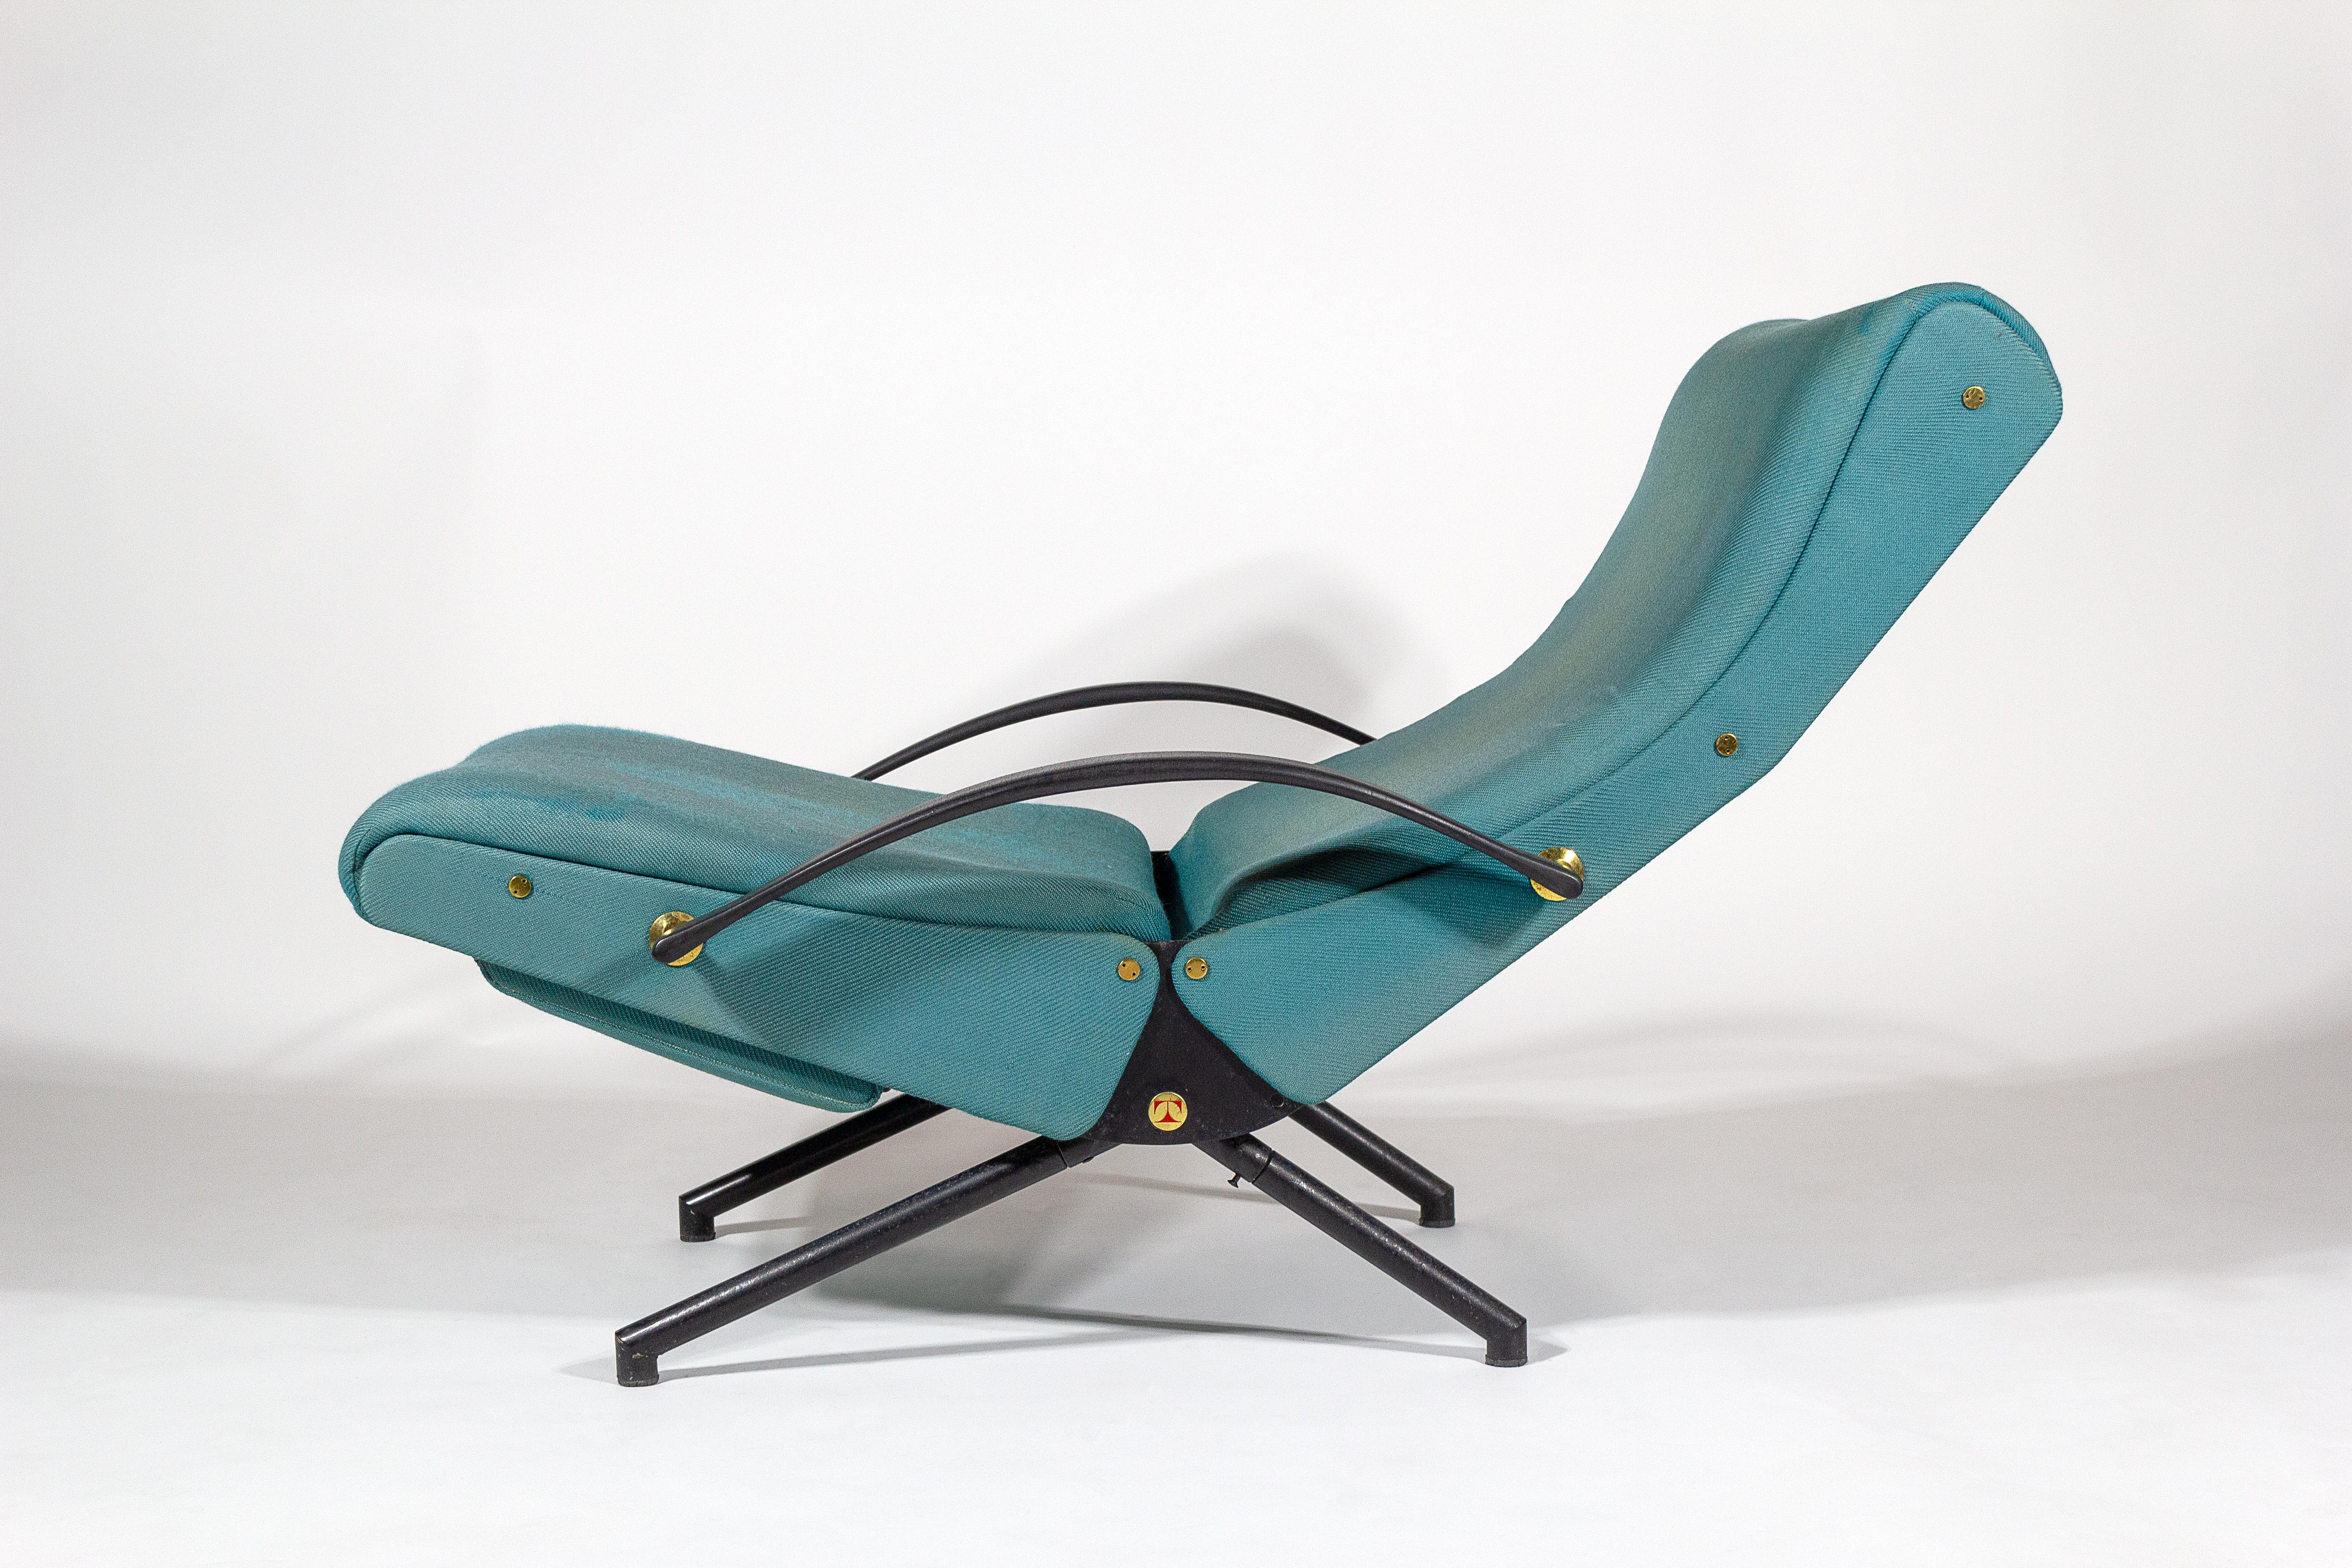 Early production P40 lounge chair designed by Osvaldo Borsani for Tecno, Italy, 1950s. The lounge, with an extendable footrest, is designed to recline and can be set in several positions. 

Osvaldo Borsani, an Italian architect and furniture